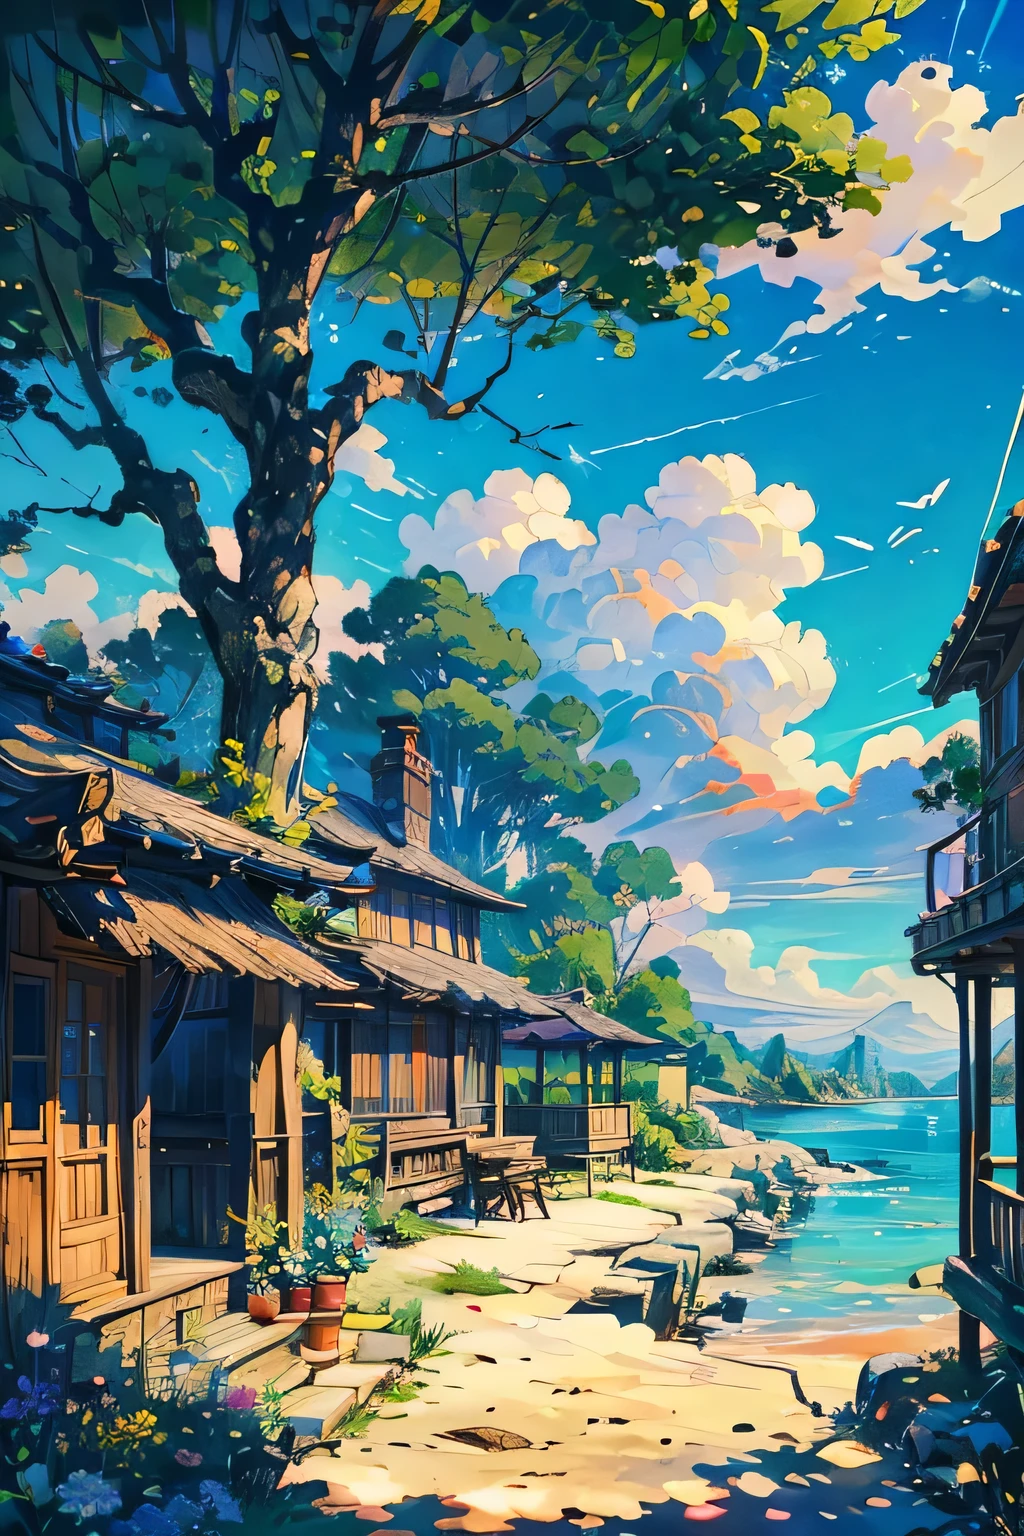 painting of a book store on the beach with a tree and a bird flying overhead, a storybook illustration by Ni Yuanlu, pixiv contest winner, conceptual art, makoto shinkai cyril rolando, small library, style of makoto shinkai, in style of makoto shinkai, studio glibly , vibrant colors, makoto shinkai, library background, sunset with red and orange, purple flowers, wind, warm, Twinkling string lights hang from the trees, blue color